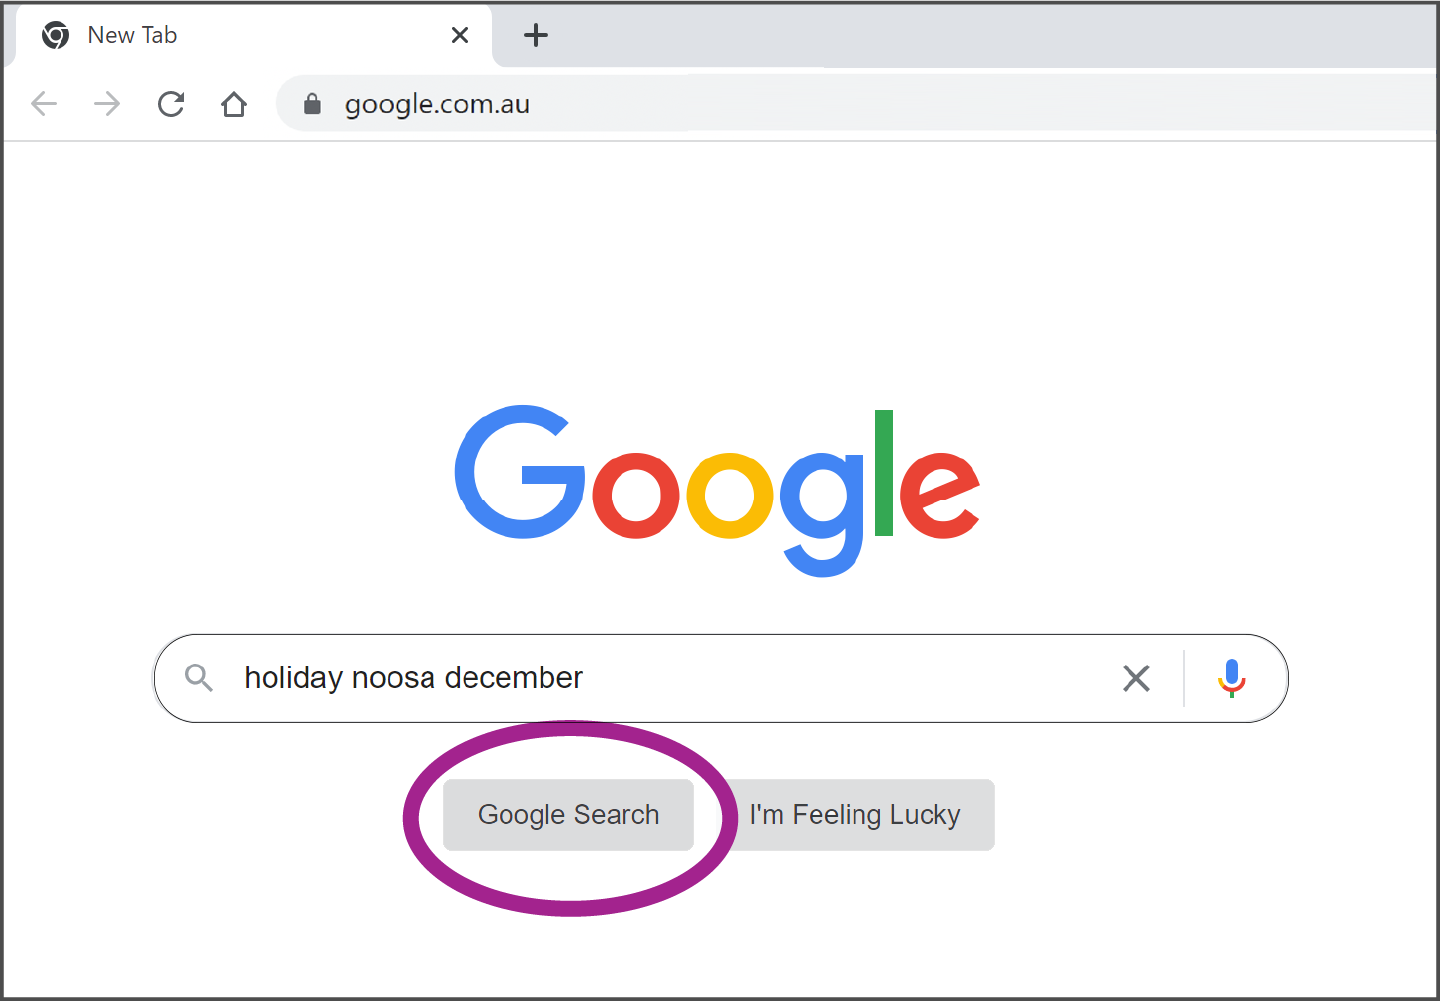 A search term typed in, and the Google Search button highlighted